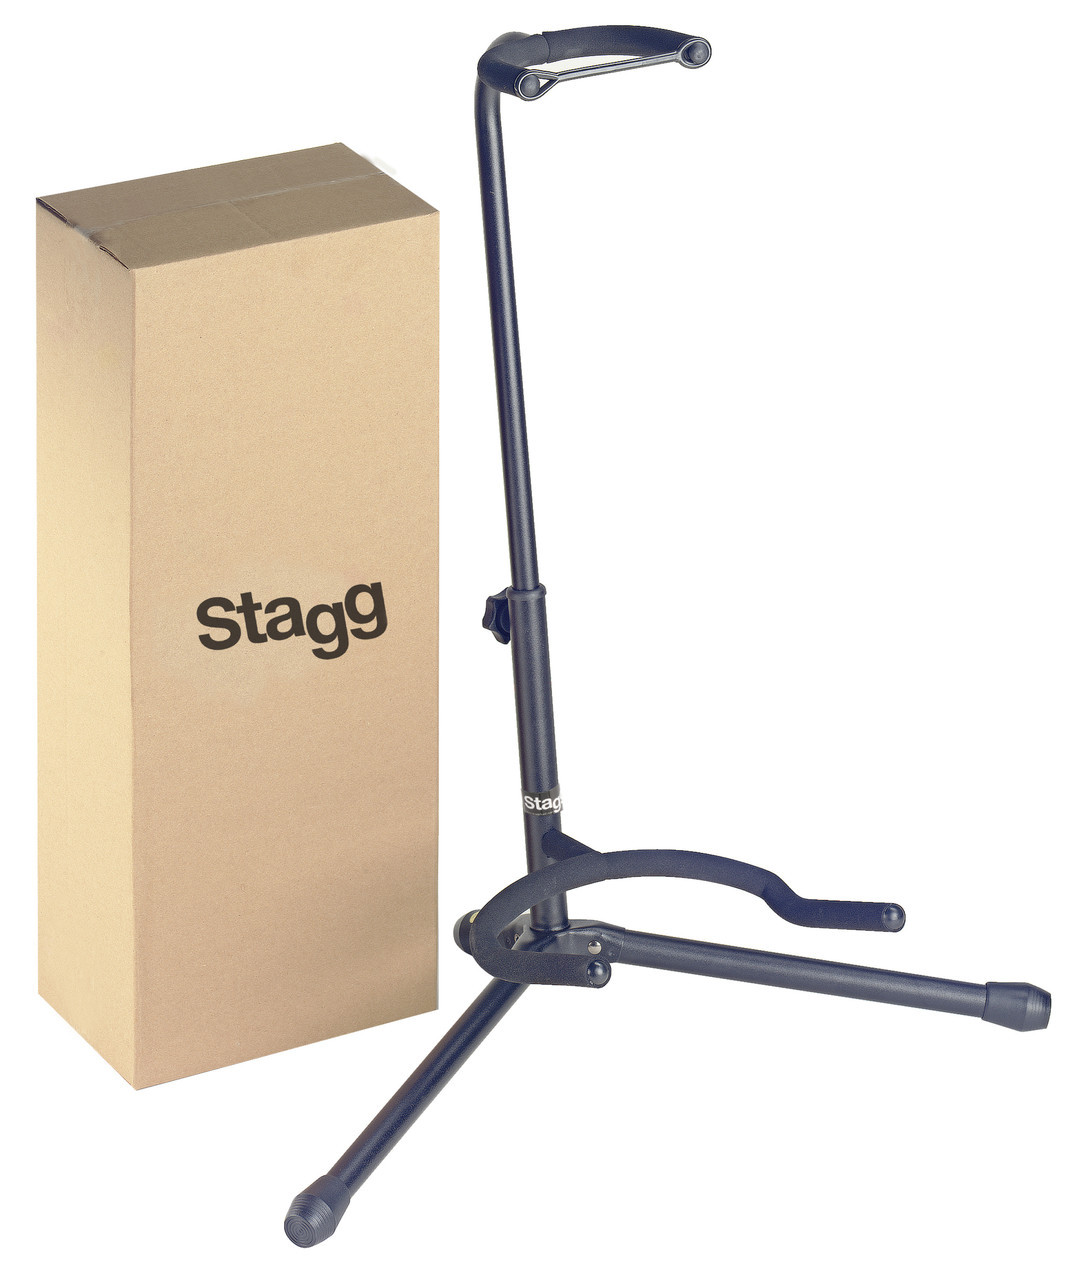 STAGG SUPPORT GUITARE NOIR Stand pour guitare, SG-A100BK